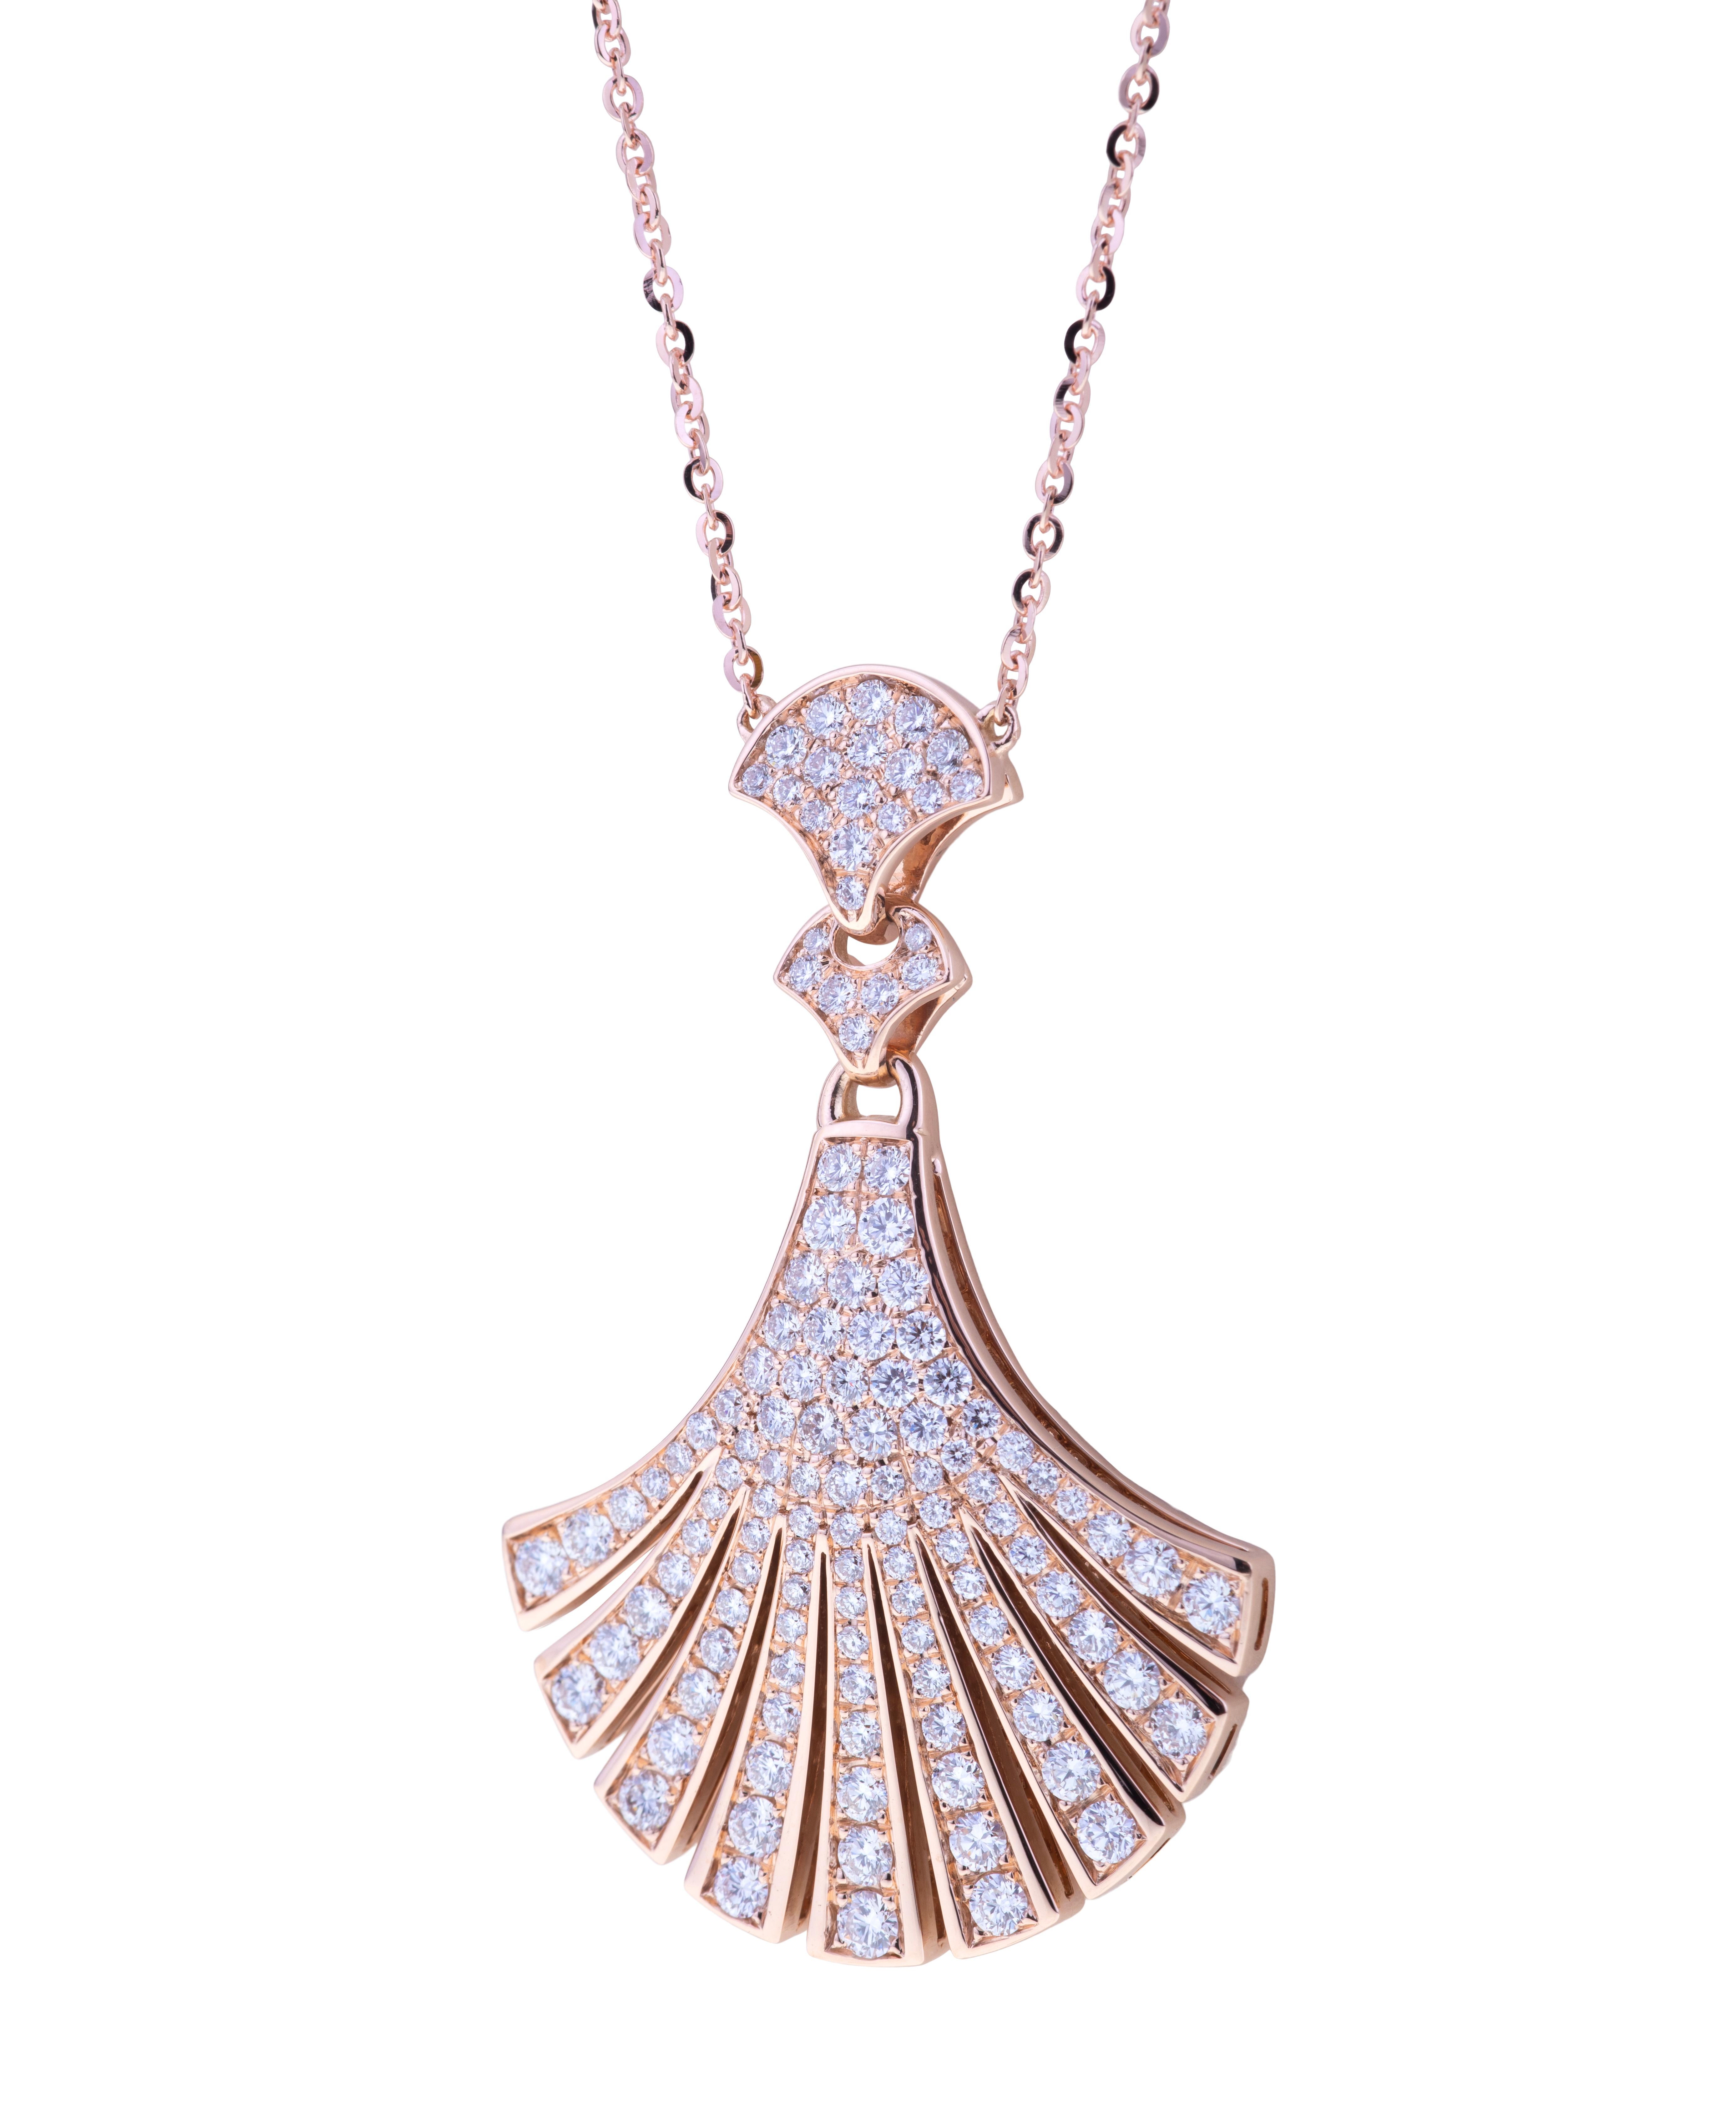 Angeletti Pendant Wave Rose Gold with Diamond Arches. Signature Design.
The Signature Wave Collection Evolves into a Stilish Piece of Jewellery.
Manifactured in Rome. Details are our Priority.
Gold Weight is Around 17 Grams and  Diamonds are ct.